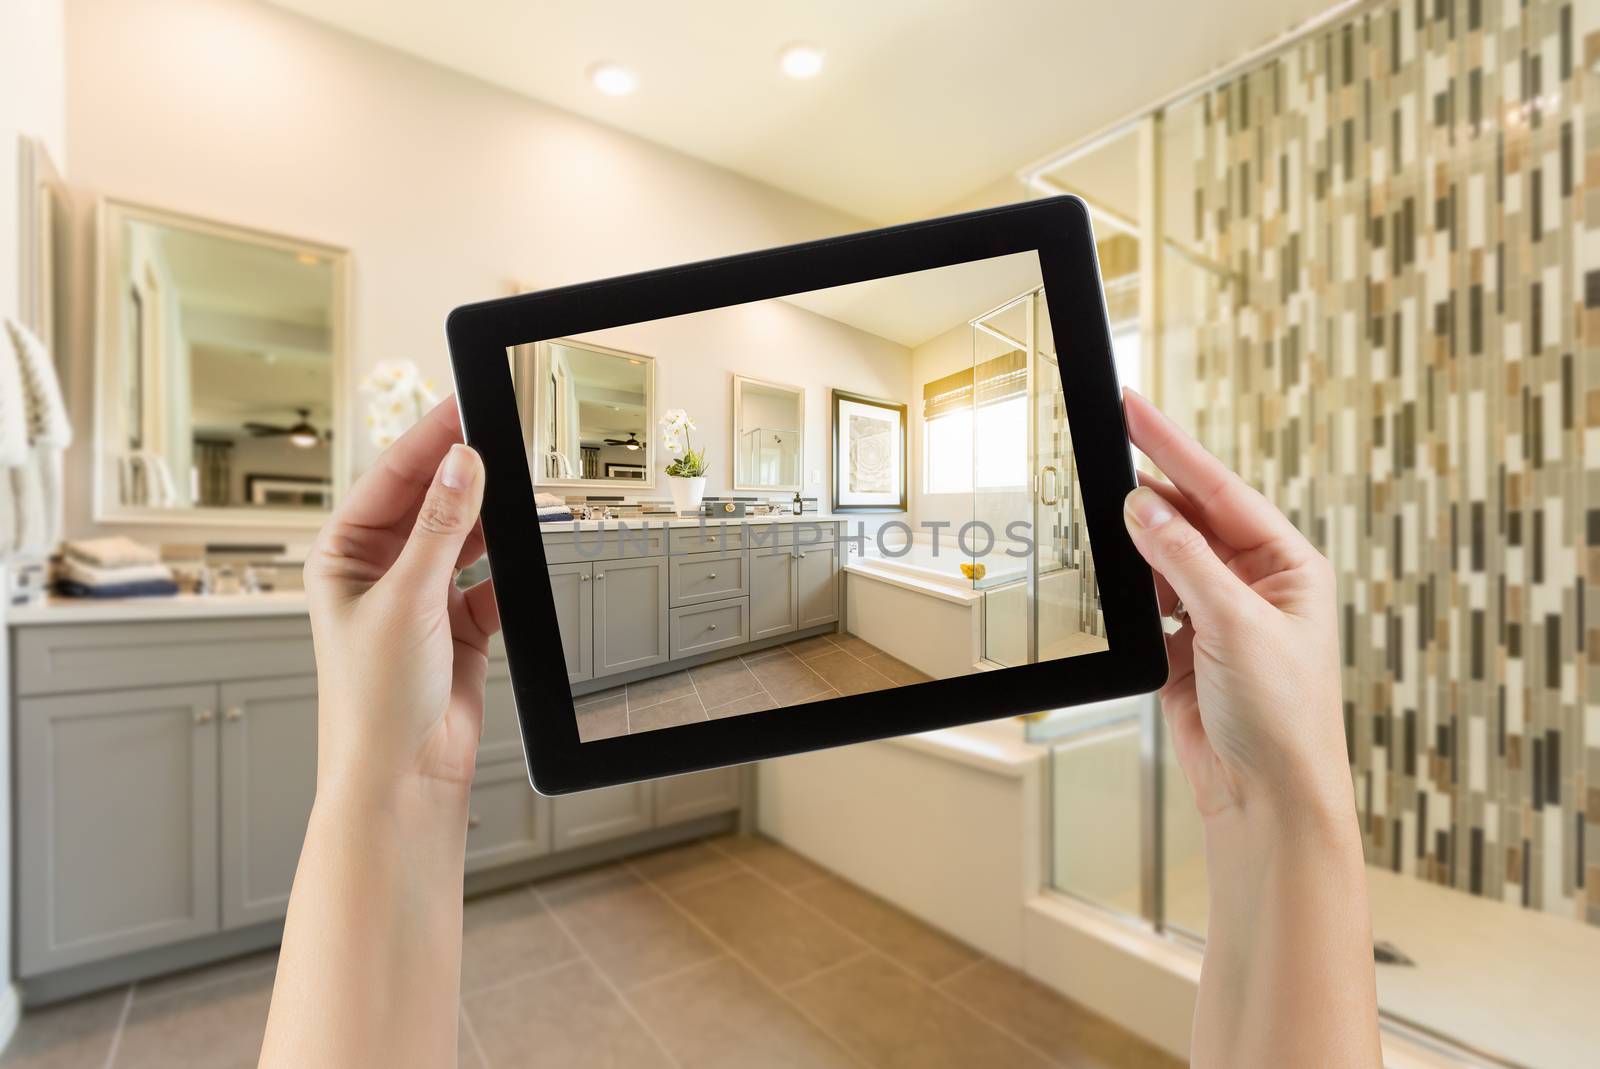 Master Bathroom Interior and Hands Holding Computer Tablet with Photo on Screen.